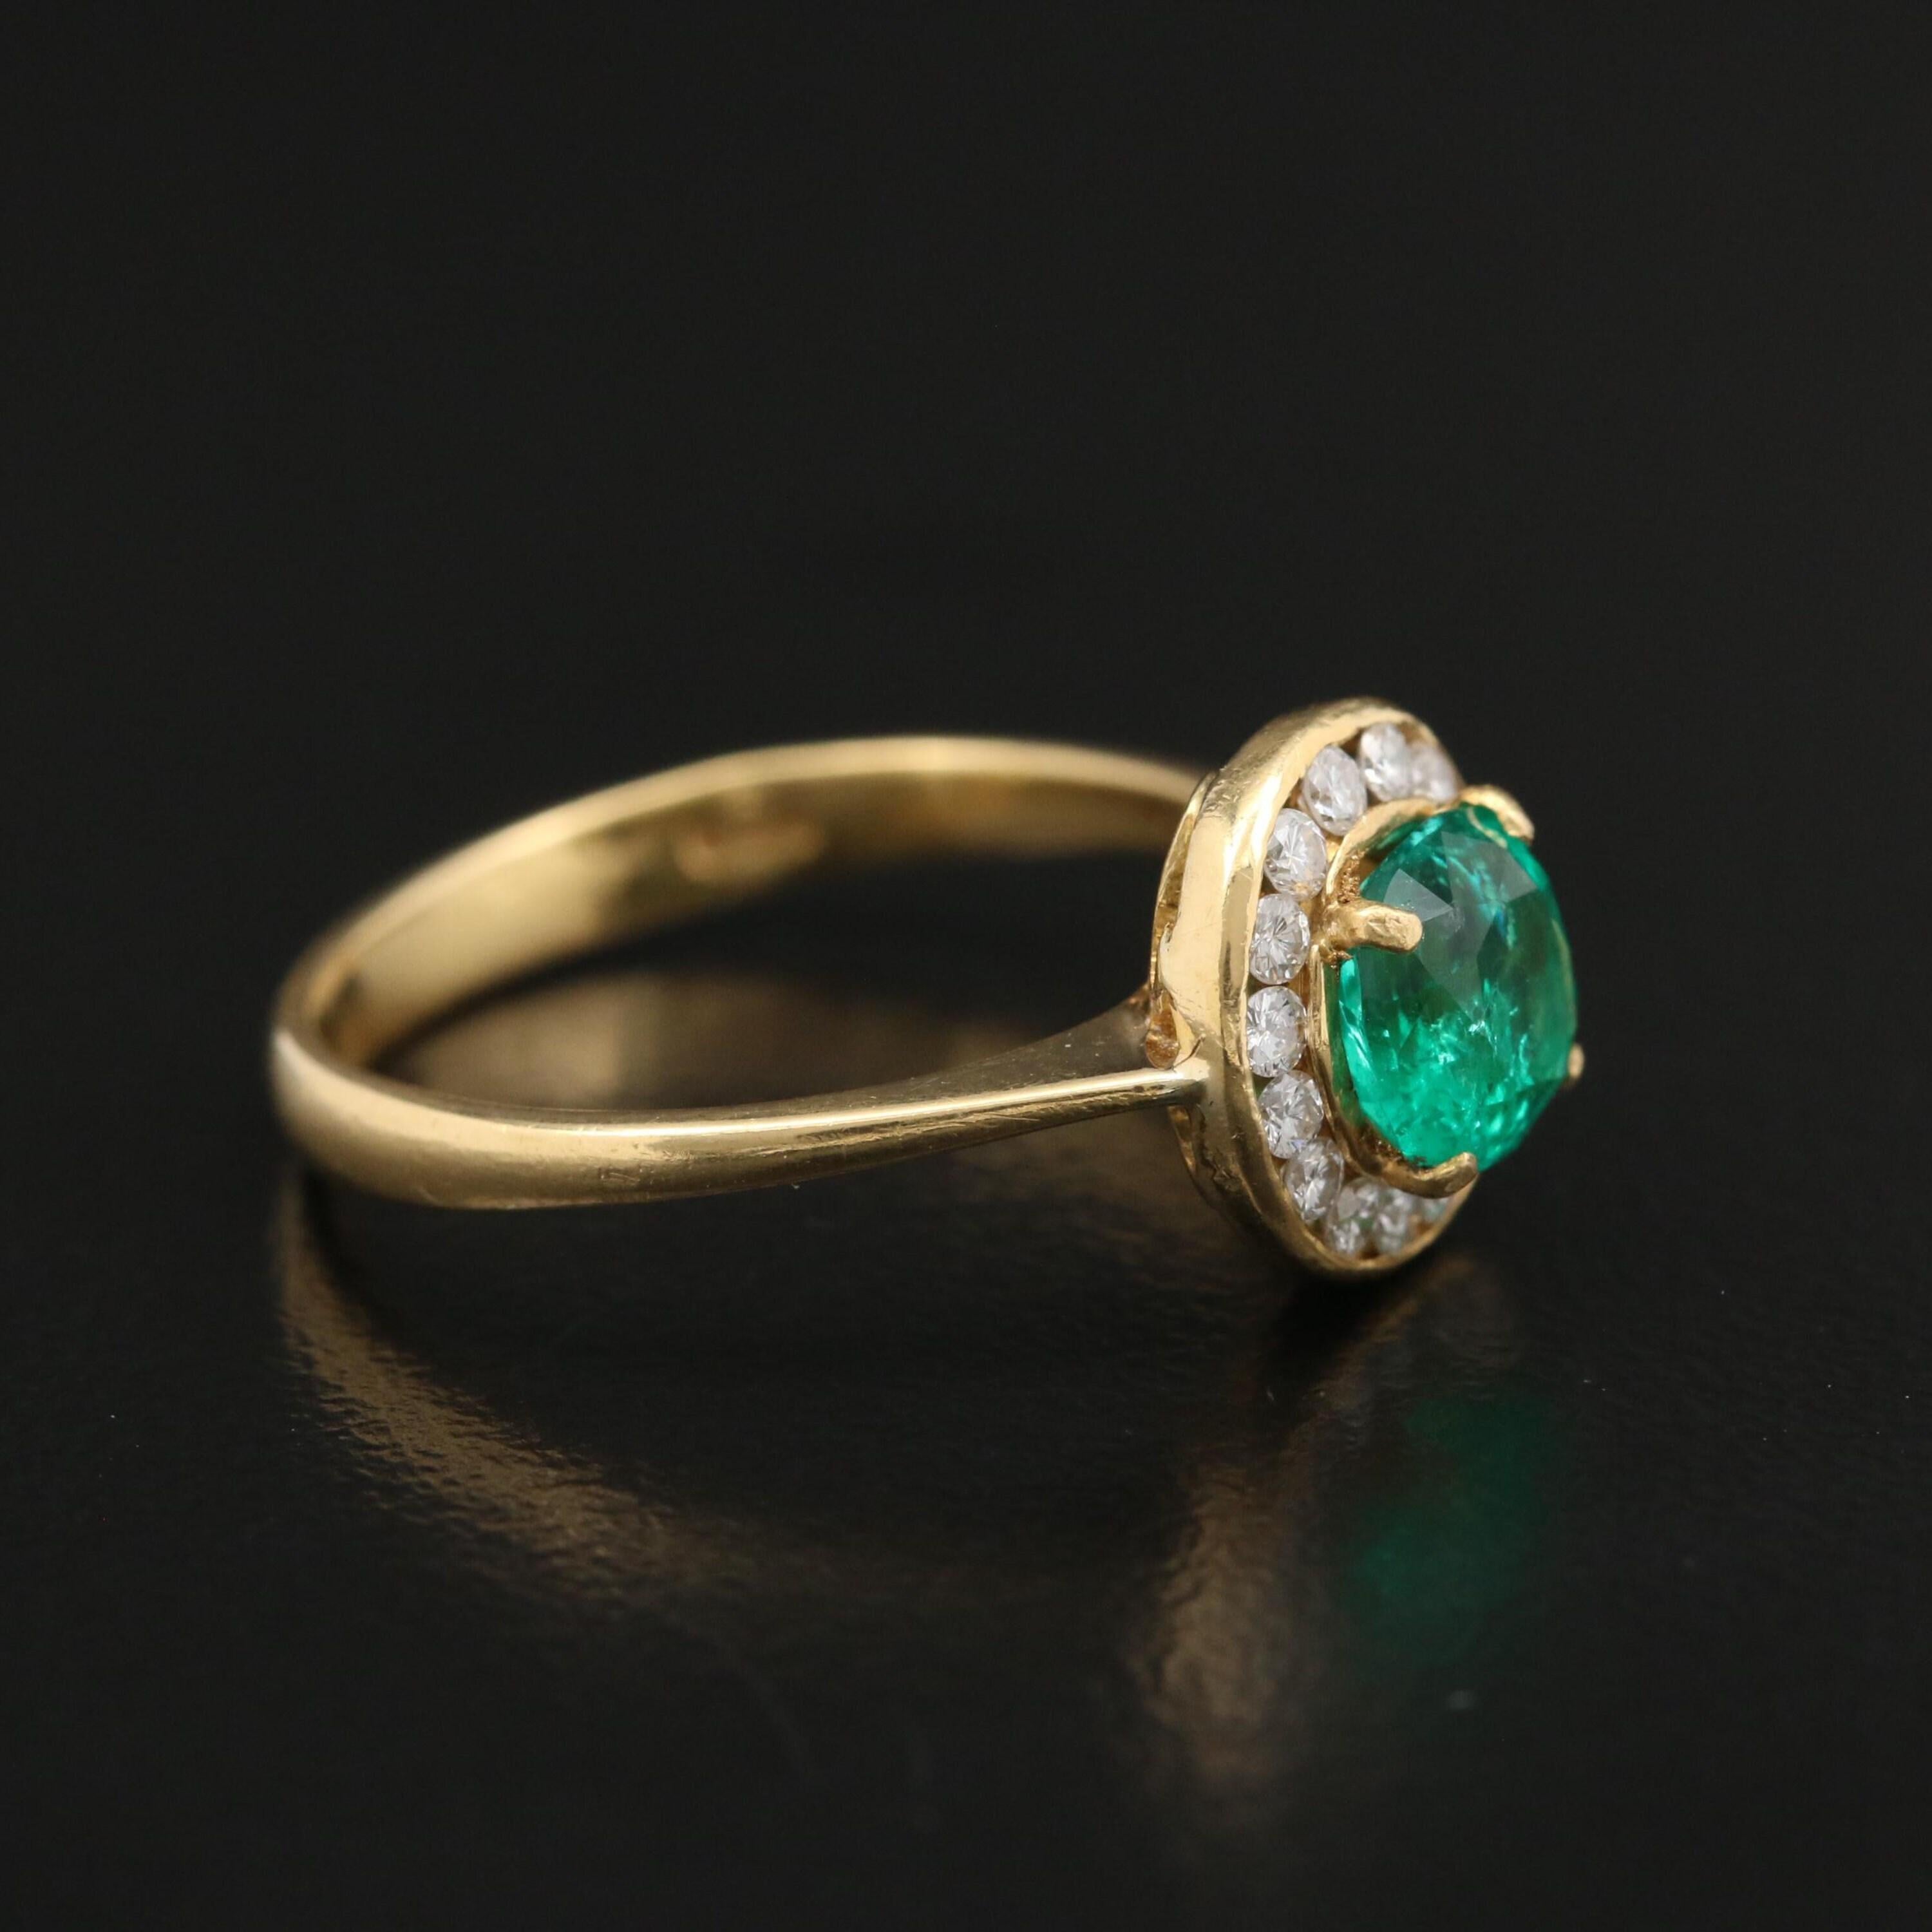 For Sale:  Halo Emerald Engagement Ring, Antique Emerald Wedding Ring 4